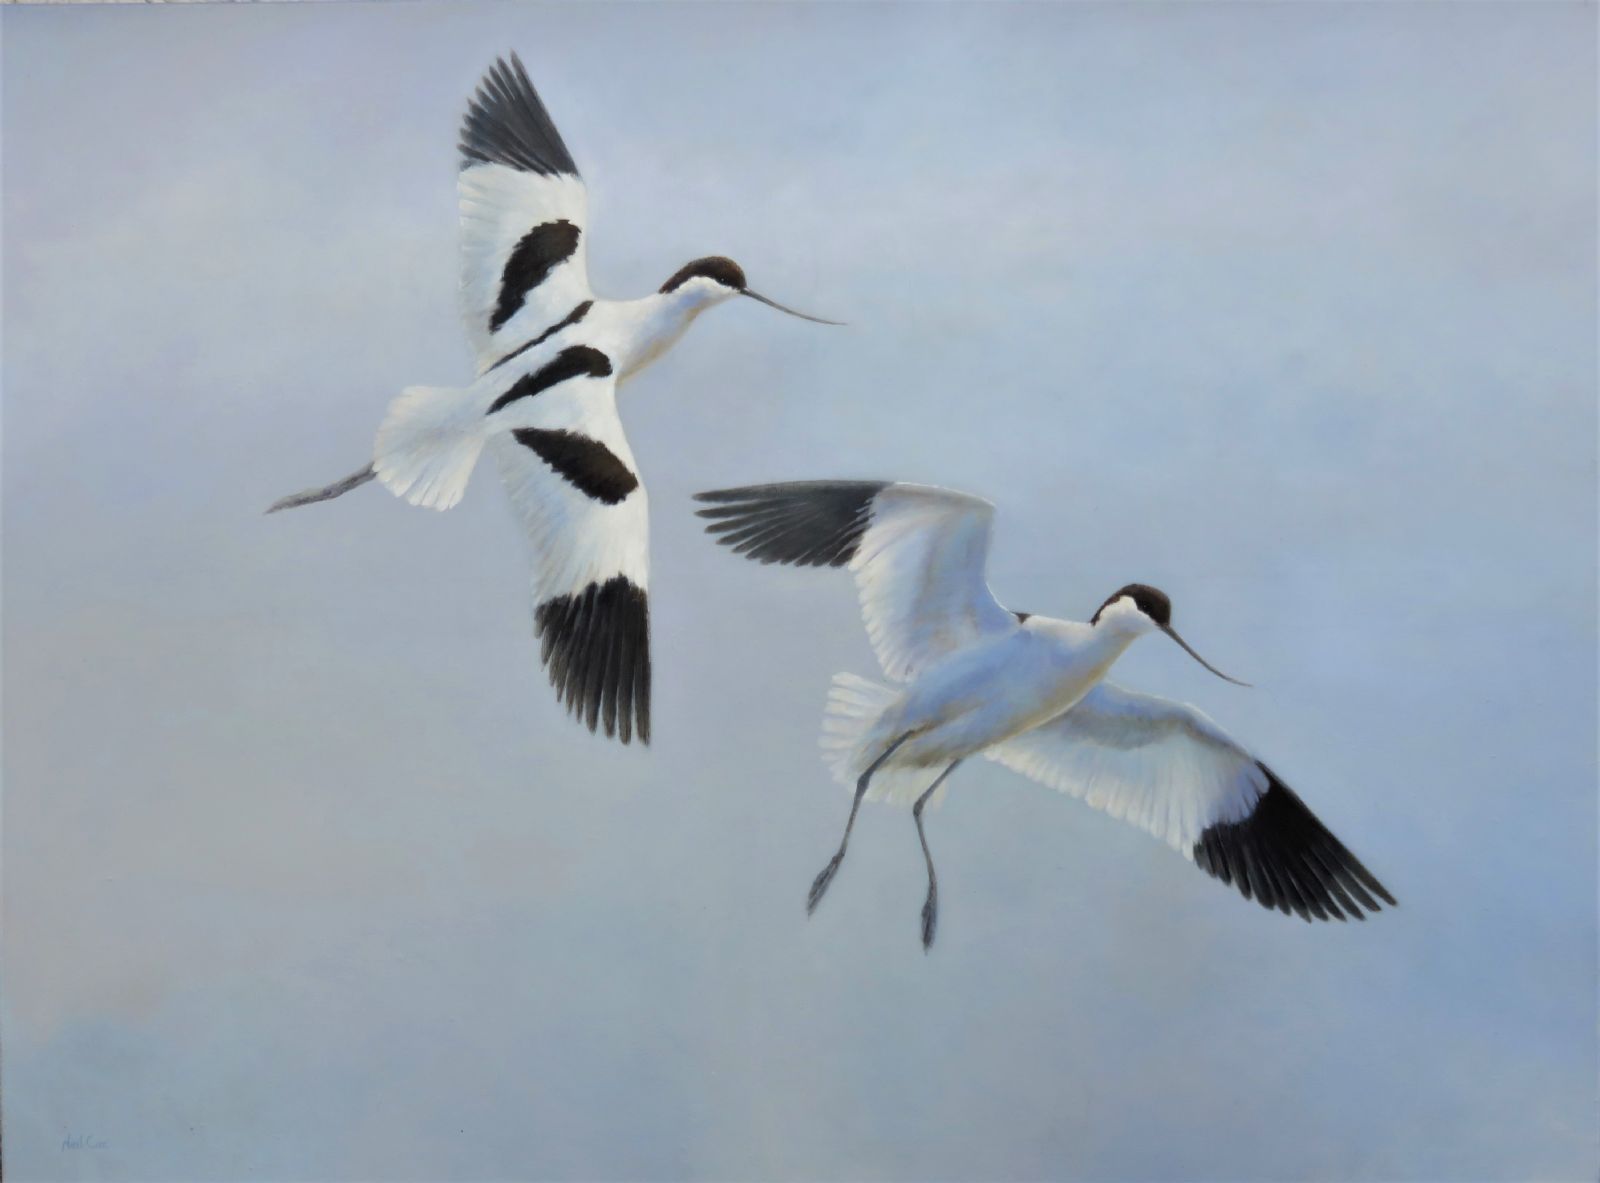 Dropping In, Avocets Over the Exe by Neil Cox